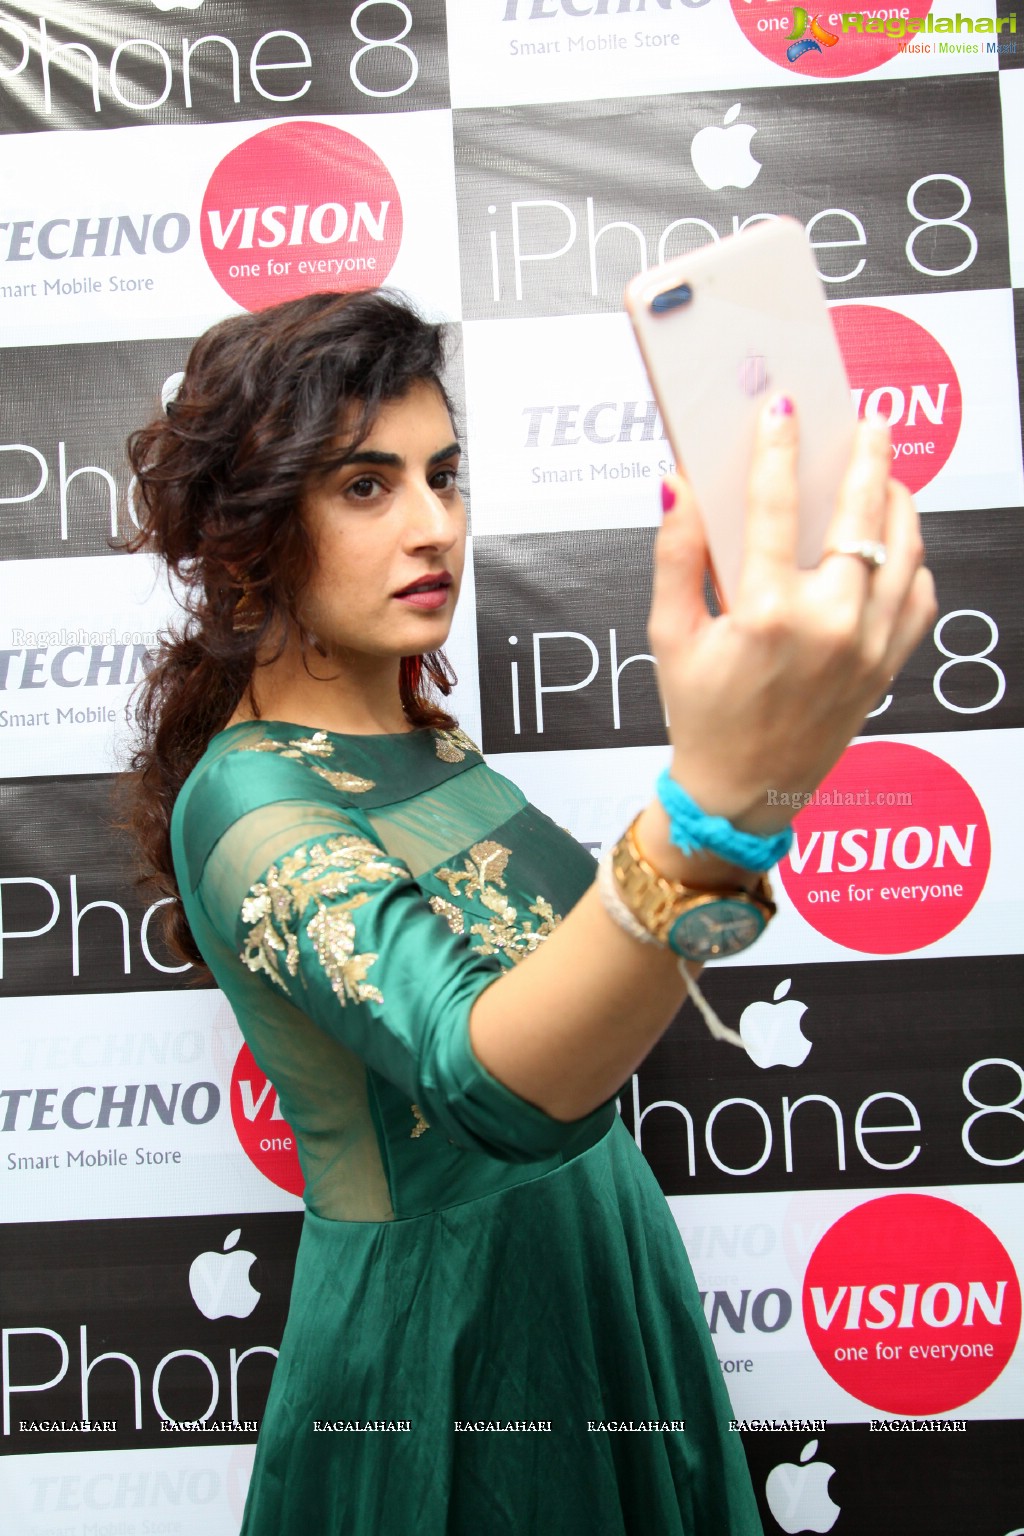 Archana Veda launches iPhone 8 at Technovision Mobiles